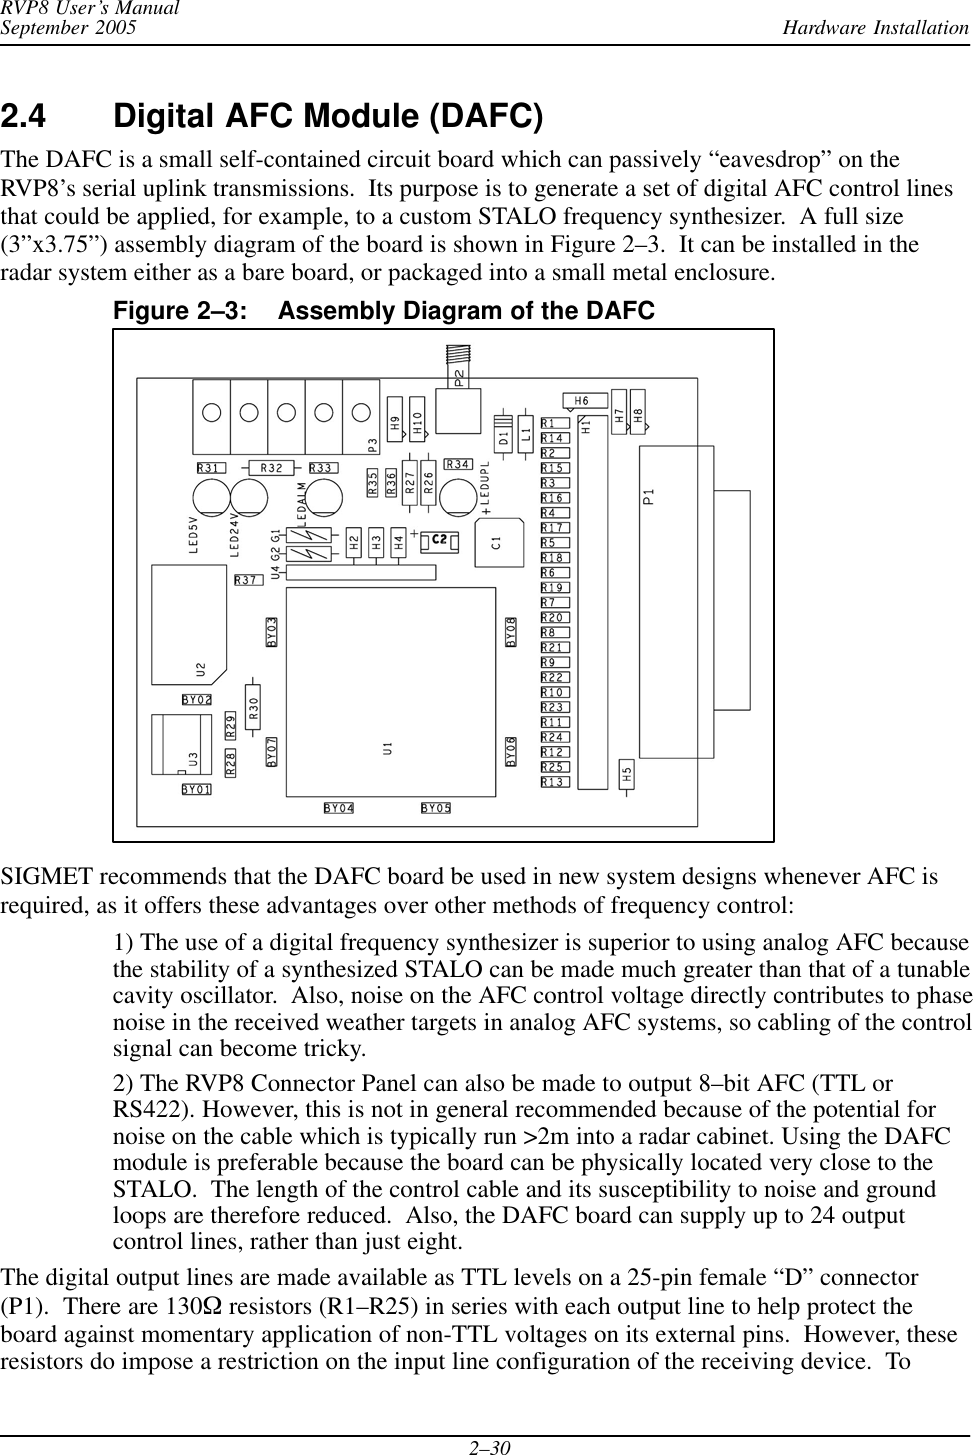 Hardware InstallationRVP8 User’s ManualSeptember 20052–302.4 Digital AFC Module (DAFC)The DAFC is a small self-contained circuit board which can passively “eavesdrop” on theRVP8’s serial uplink transmissions.  Its purpose is to generate a set of digital AFC control linesthat could be applied, for example, to a custom STALO frequency synthesizer.  A full size(3”x3.75”) assembly diagram of the board is shown in Figure 2–3.  It can be installed in theradar system either as a bare board, or packaged into a small metal enclosure.Figure 2–3: Assembly Diagram of the DAFCSIGMET recommends that the DAFC board be used in new system designs whenever AFC isrequired, as it offers these advantages over other methods of frequency control:1) The use of a digital frequency synthesizer is superior to using analog AFC becausethe stability of a synthesized STALO can be made much greater than that of a tunablecavity oscillator.  Also, noise on the AFC control voltage directly contributes to phasenoise in the received weather targets in analog AFC systems, so cabling of the controlsignal can become tricky.2) The RVP8 Connector Panel can also be made to output 8–bit AFC (TTL orRS422). However, this is not in general recommended because of the potential fornoise on the cable which is typically run &gt;2m into a radar cabinet. Using the DAFCmodule is preferable because the board can be physically located very close to theSTALO.  The length of the control cable and its susceptibility to noise and groundloops are therefore reduced.  Also, the DAFC board can supply up to 24 outputcontrol lines, rather than just eight.The digital output lines are made available as TTL levels on a 25-pin female “D” connector(P1).  There are 130W resistors (R1–R25) in series with each output line to help protect theboard against momentary application of non-TTL voltages on its external pins.  However, theseresistors do impose a restriction on the input line configuration of the receiving device.  To